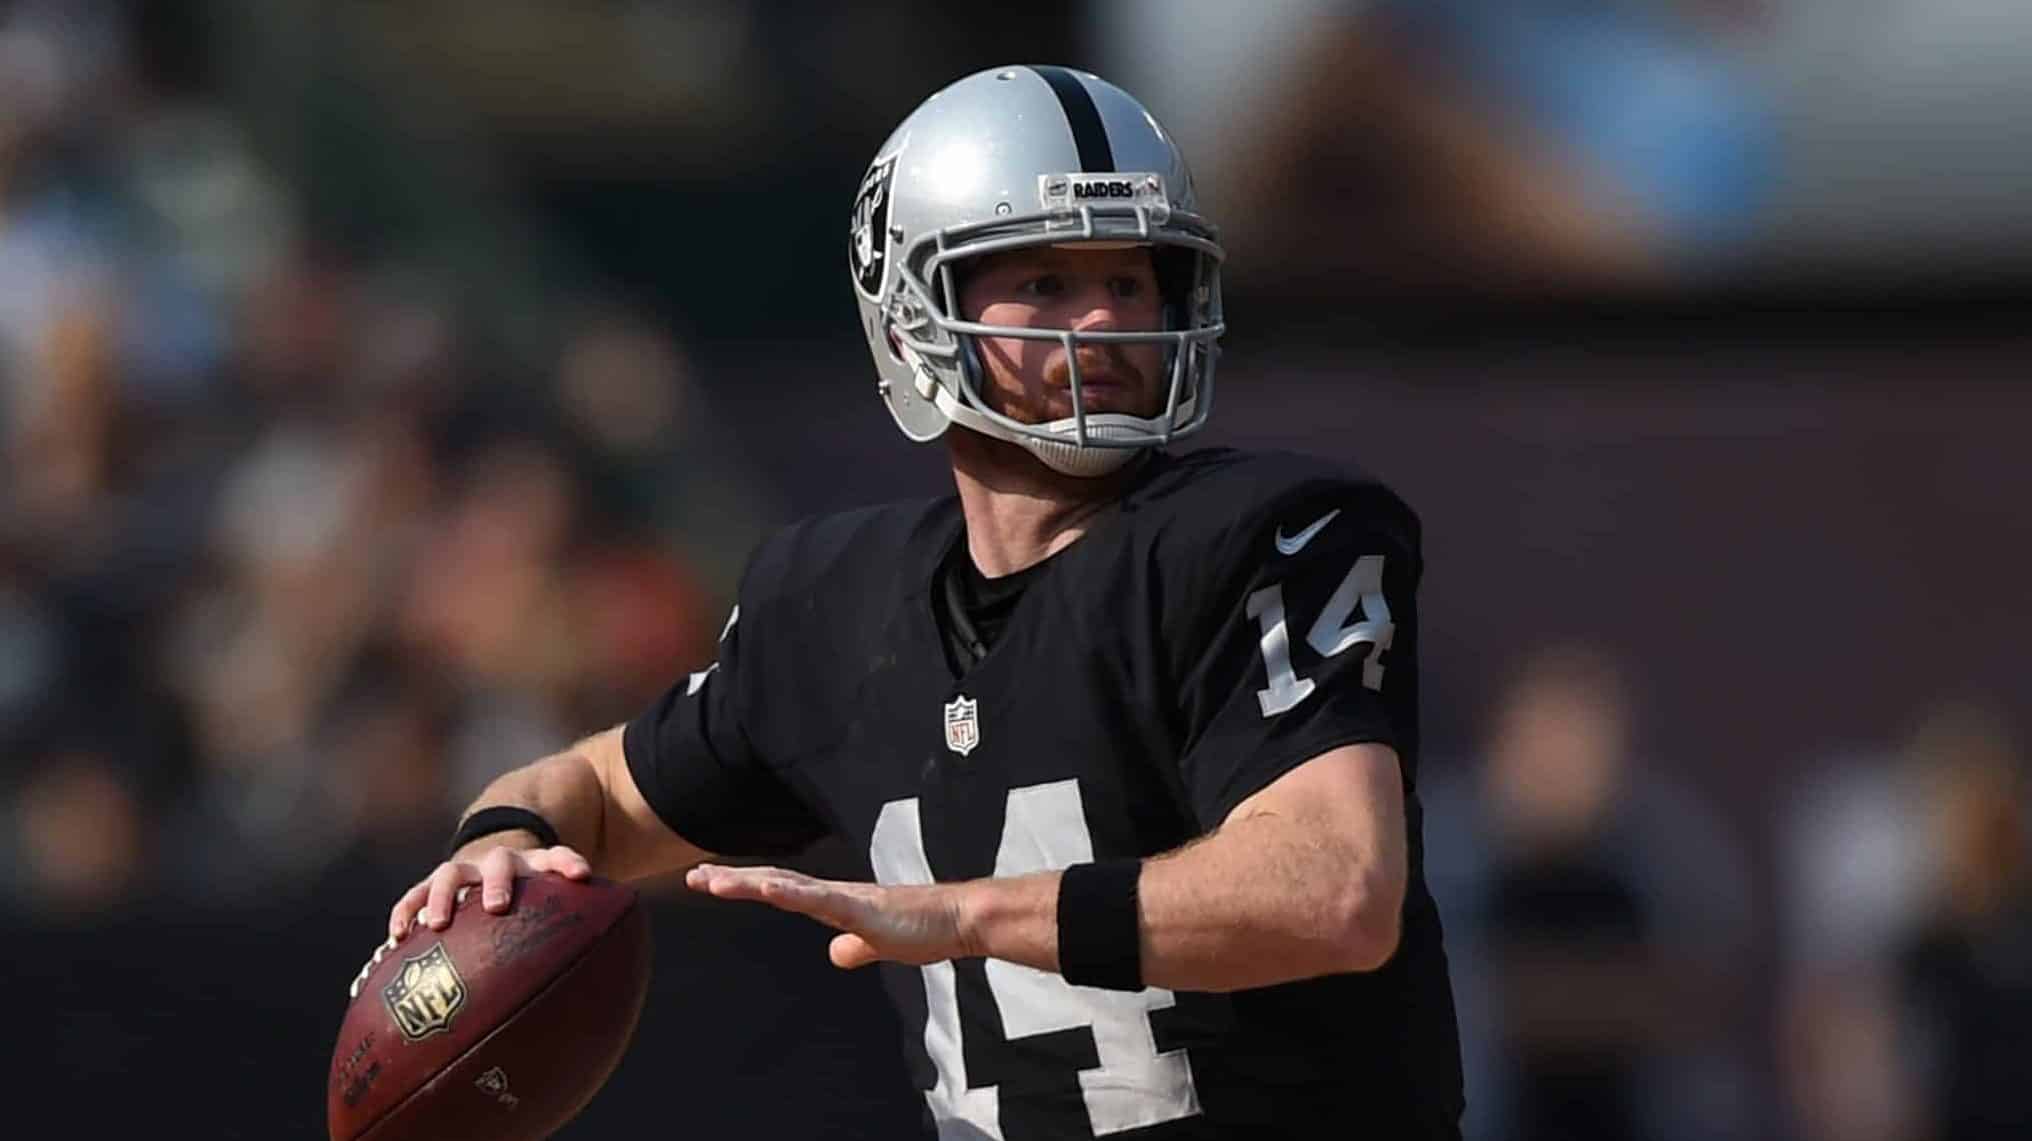 OAKLAND, CA - SEPTEMBER 13: Matt McGloin #14 of the Oakland Raiders looks to pass against the Cincinnati Bengals during the second half of their NFL game at O.co Coliseum on September 13, 2015 in Oakland, California.